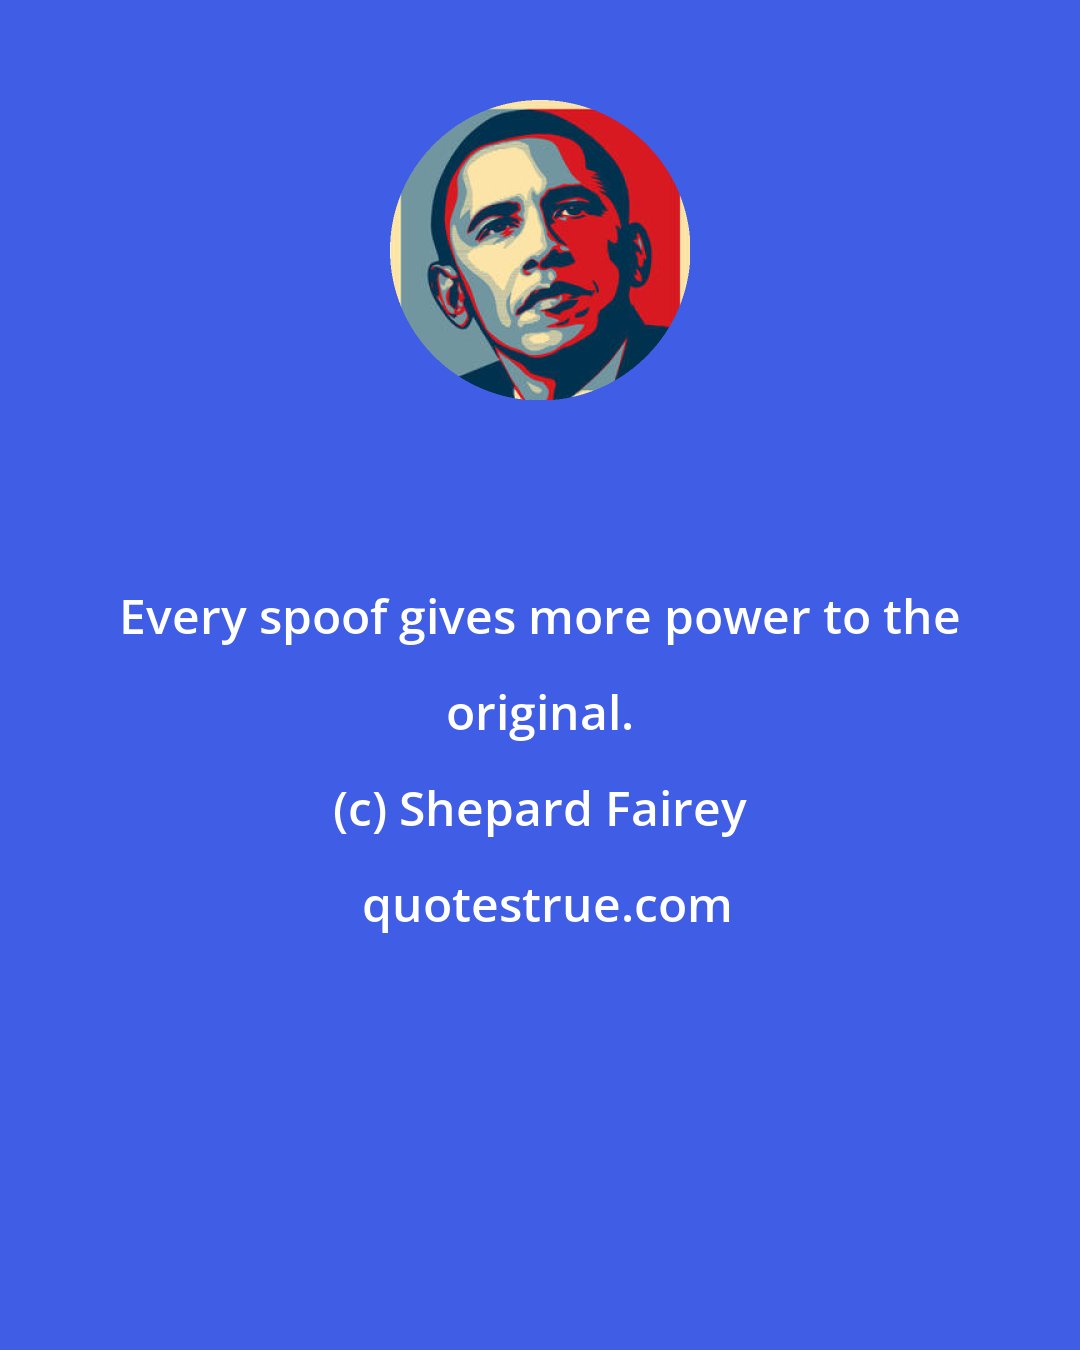 Shepard Fairey: Every spoof gives more power to the original.